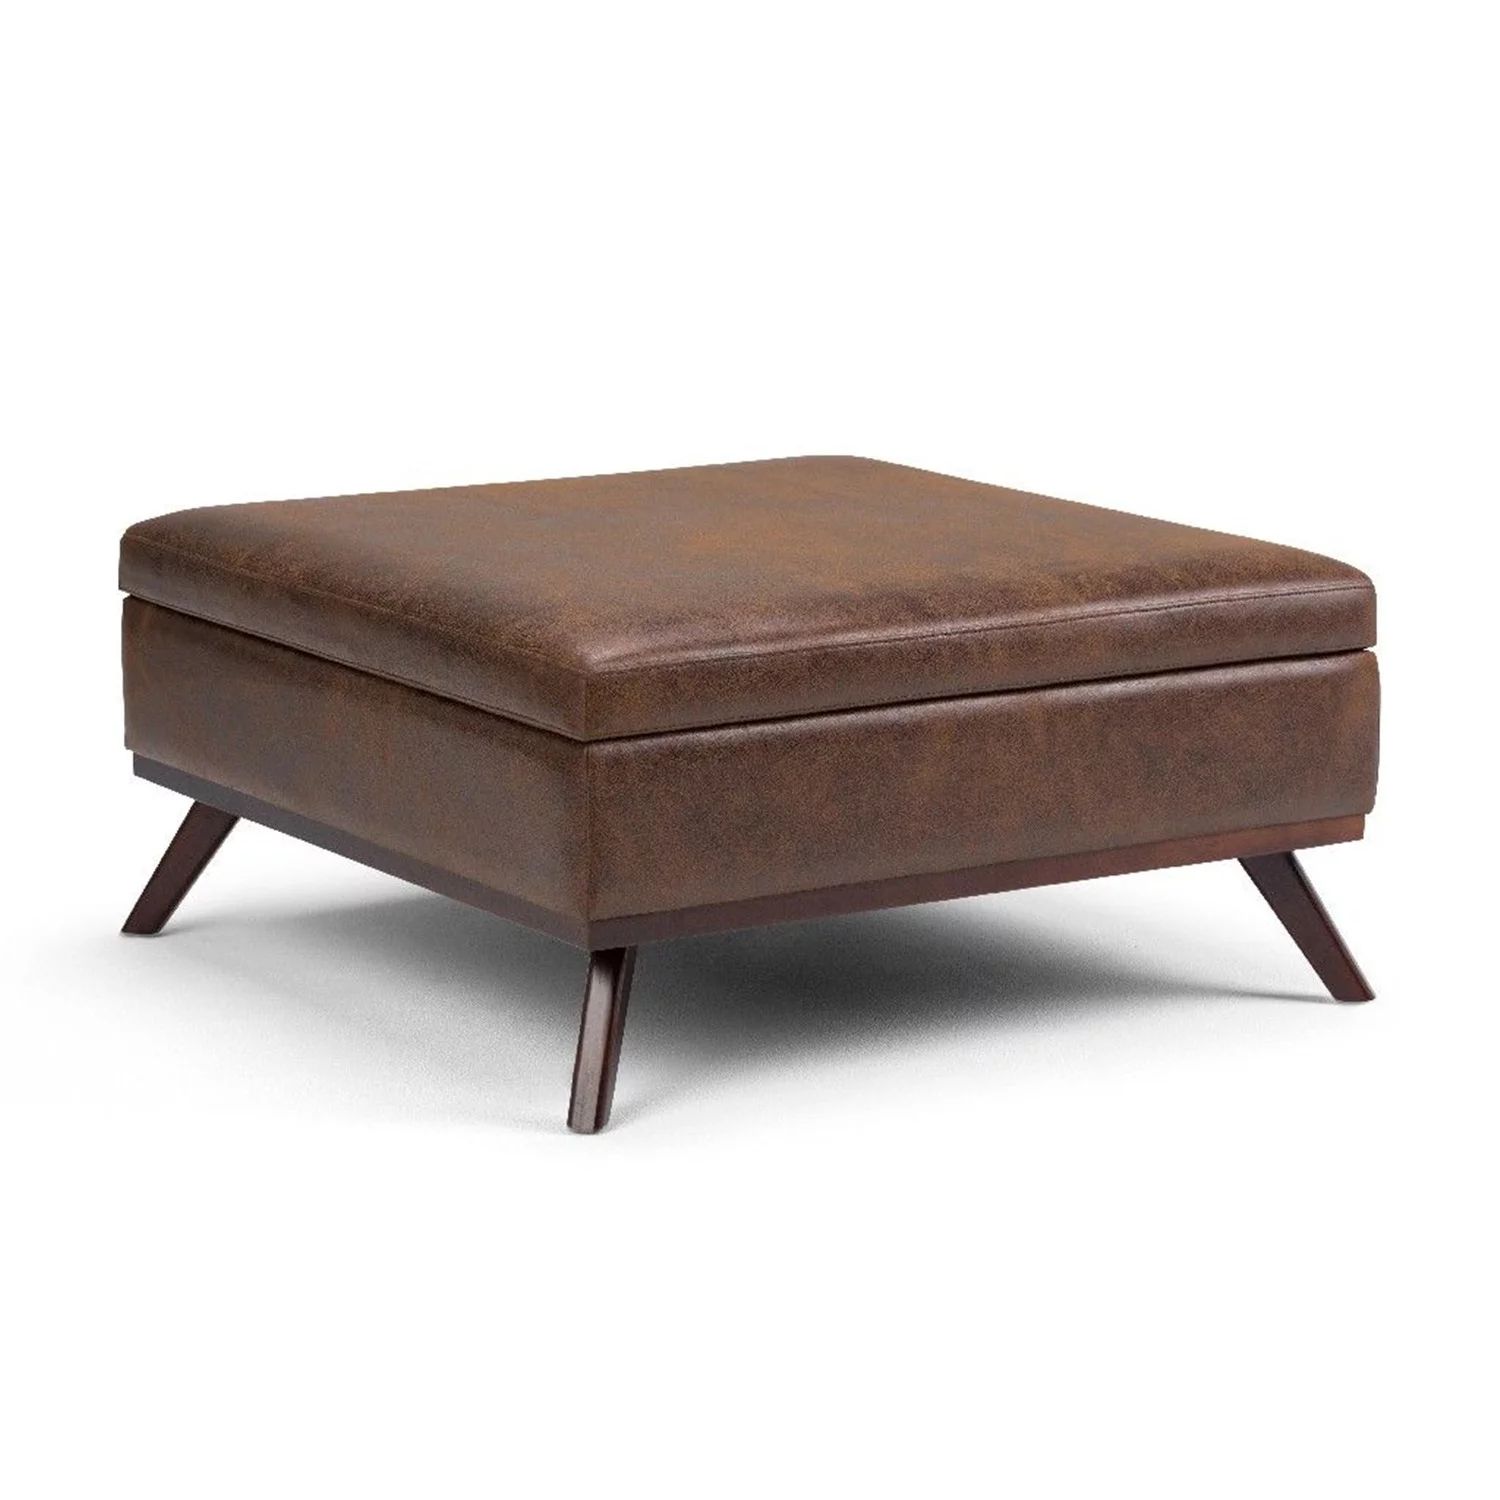 Owen Square Coffee Table Storage Ottoman in Distressed Chestnut Brown Faux Air Leather | Walmart (US)